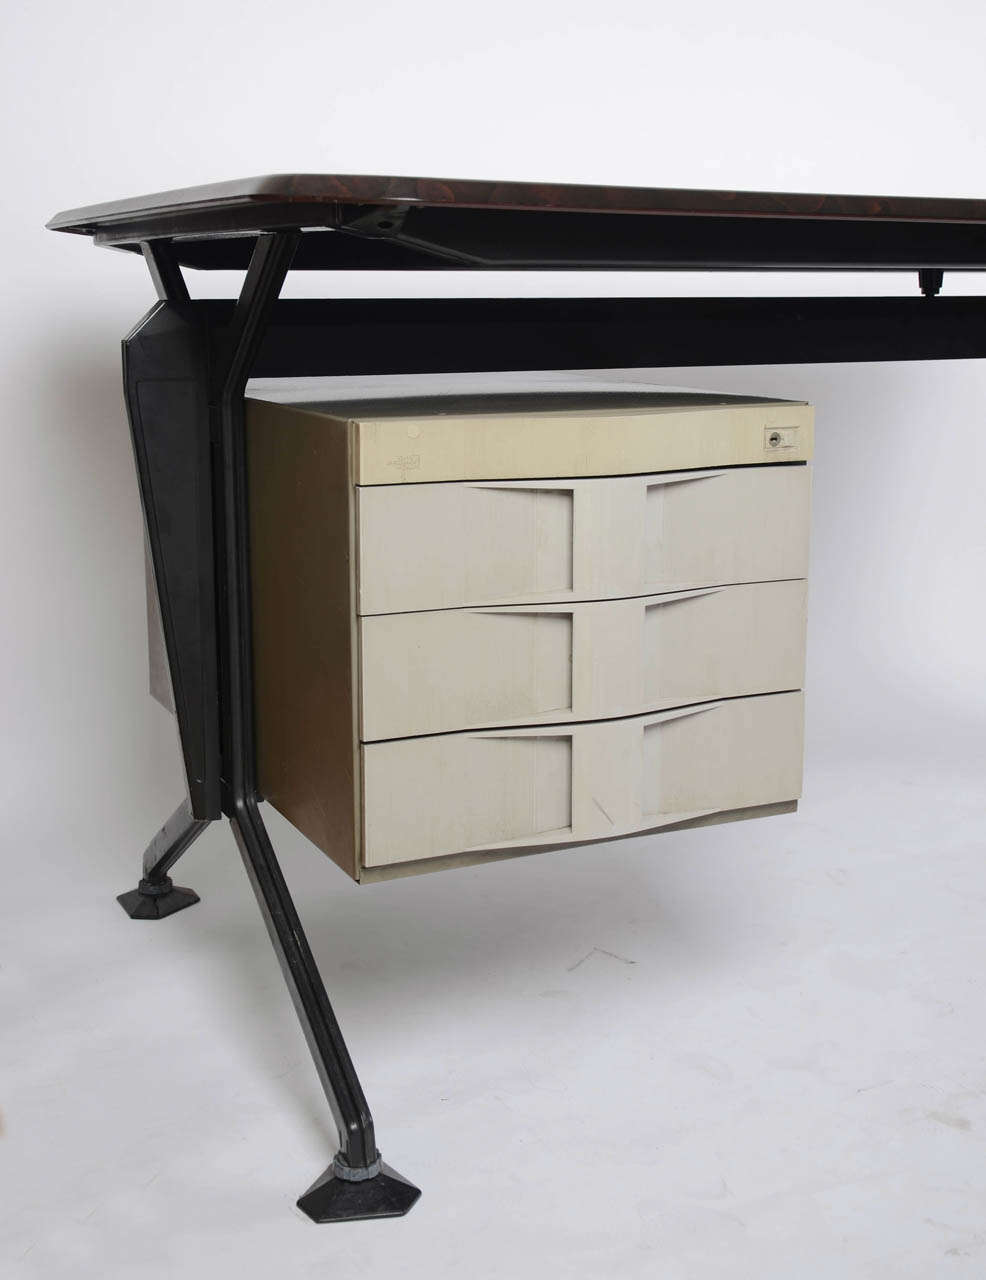 Olivetti desk series Arco designer Gruppo BBPR Lacquered metal frame with
a methacrylate top.Drawers can be fixed in both side.Adjustable feet. Excellent good condition.Original signed key.